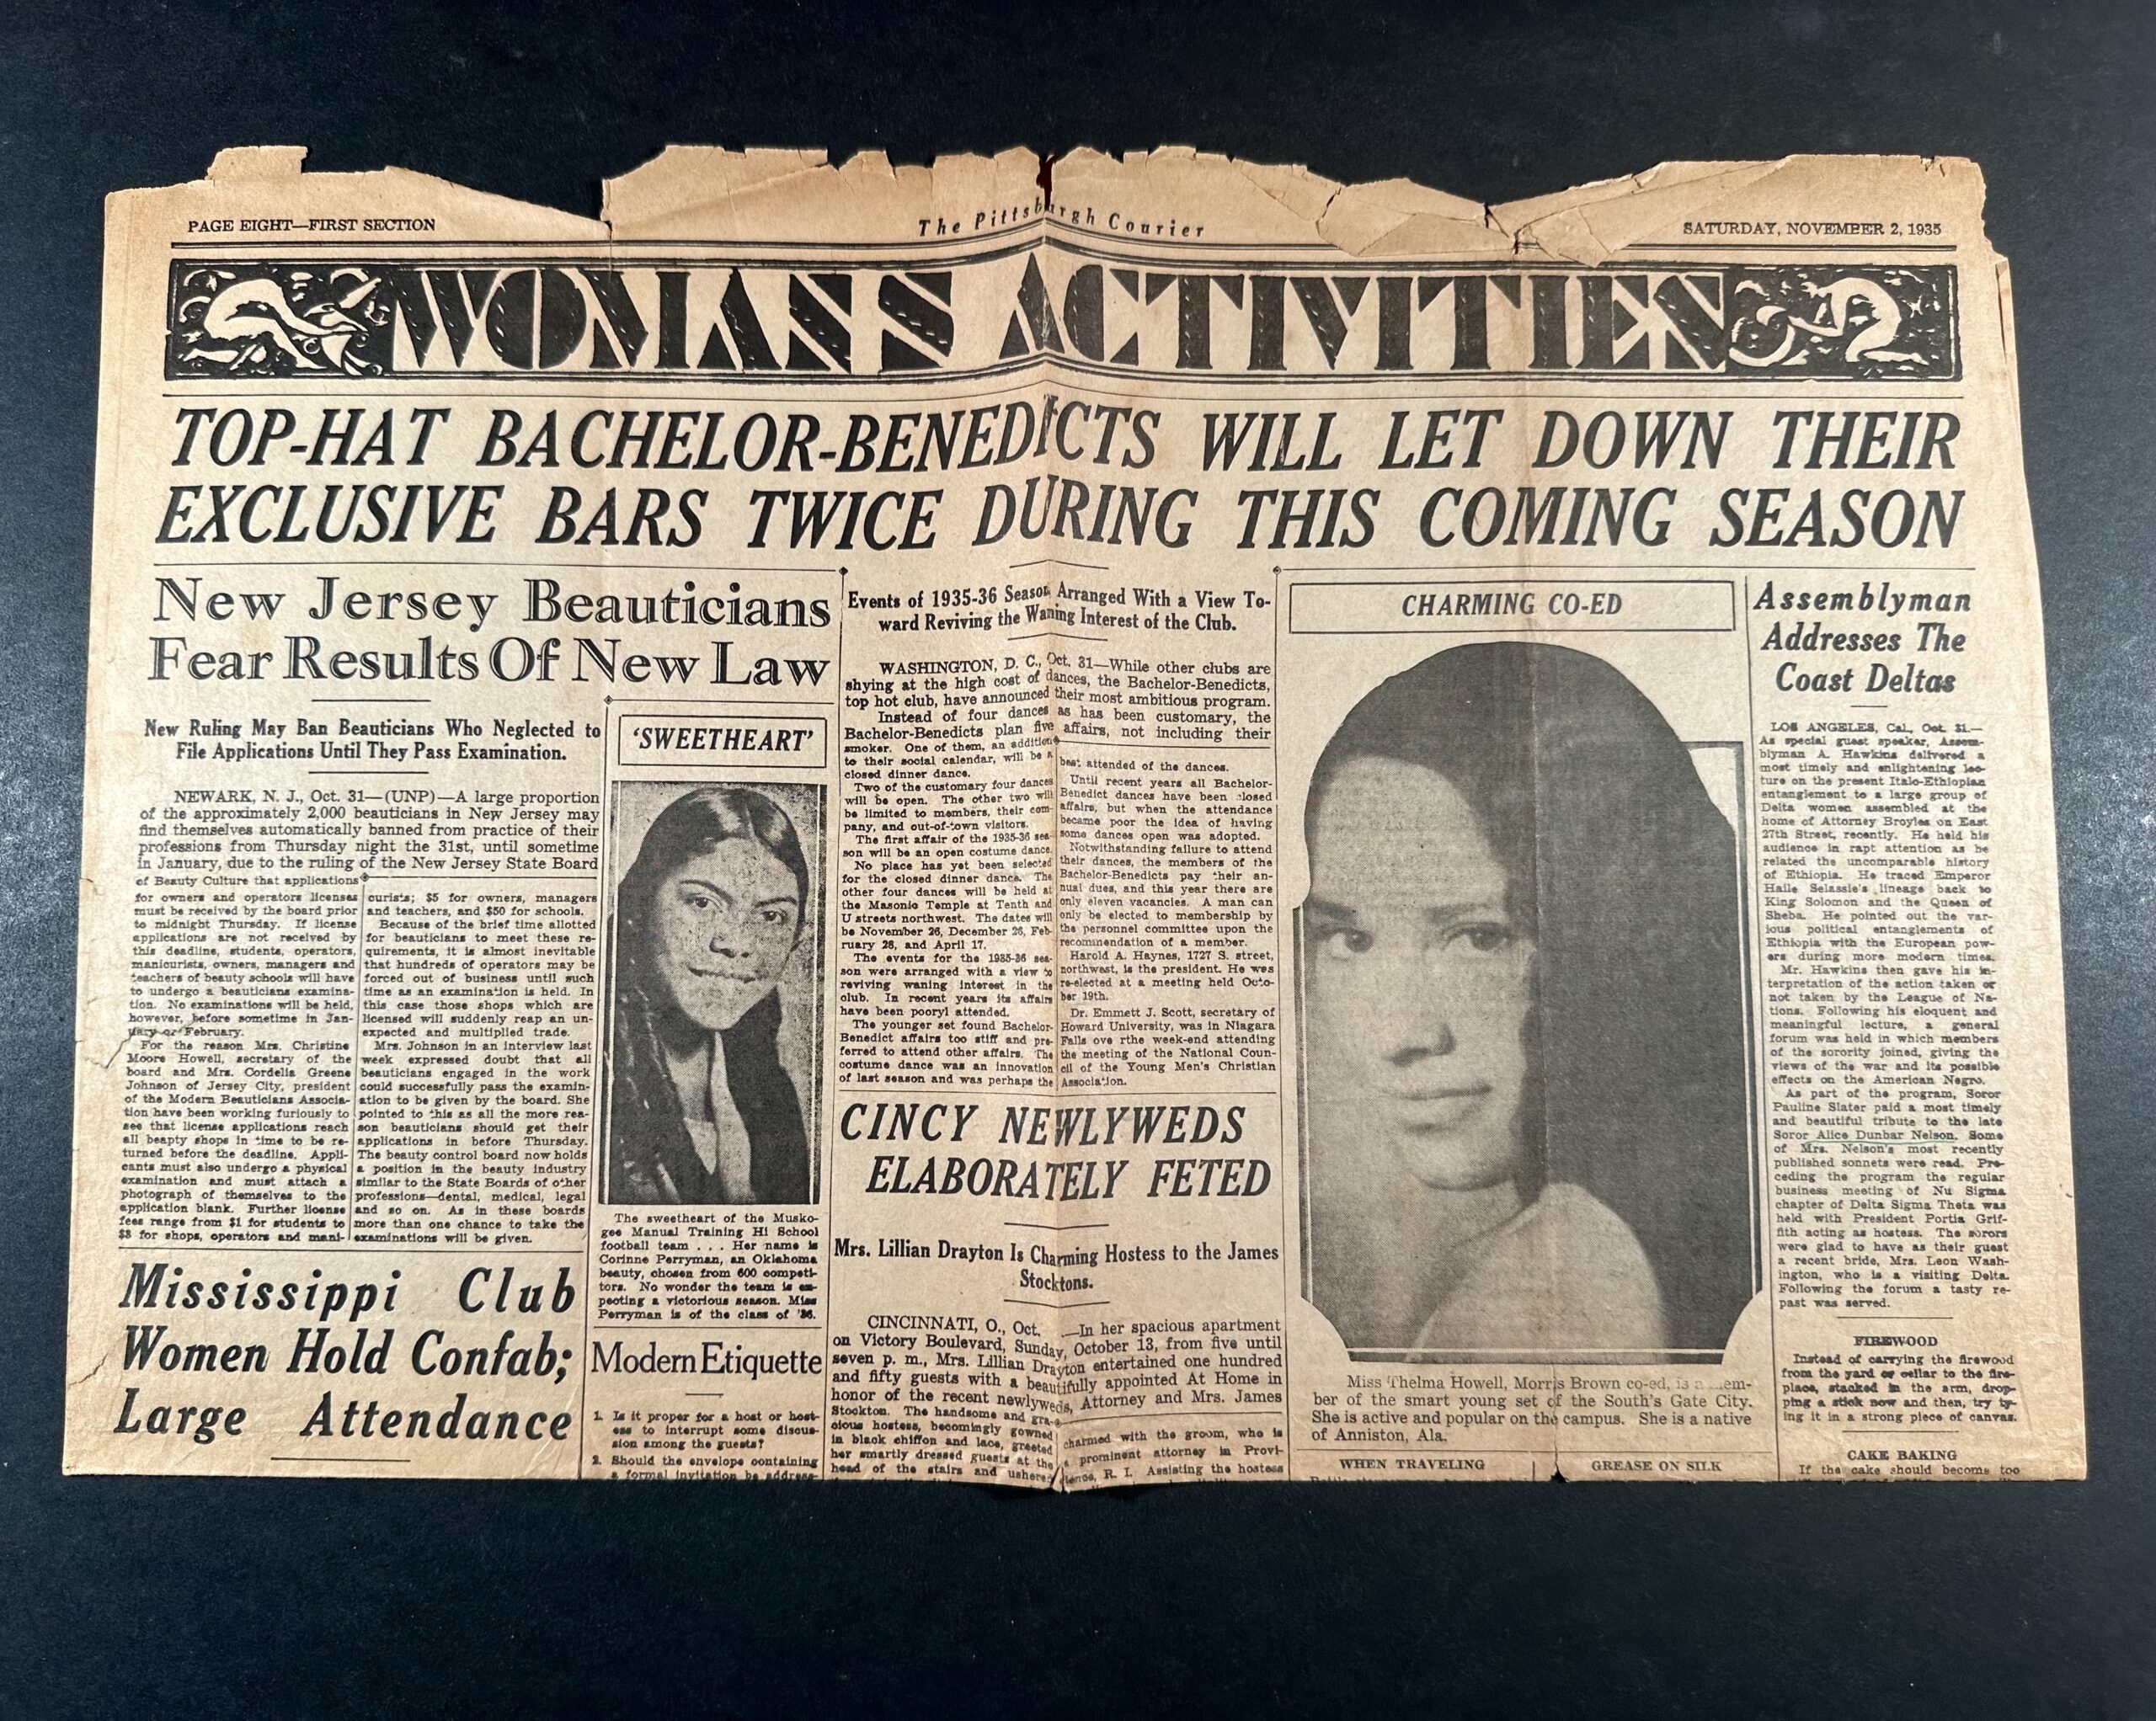 Vann, Robert L. The Pittsburgh Courier, [Saturday, November 2, 1935], “Woman’s Activities,” from the Alice Dunbar Nelson Papers collection